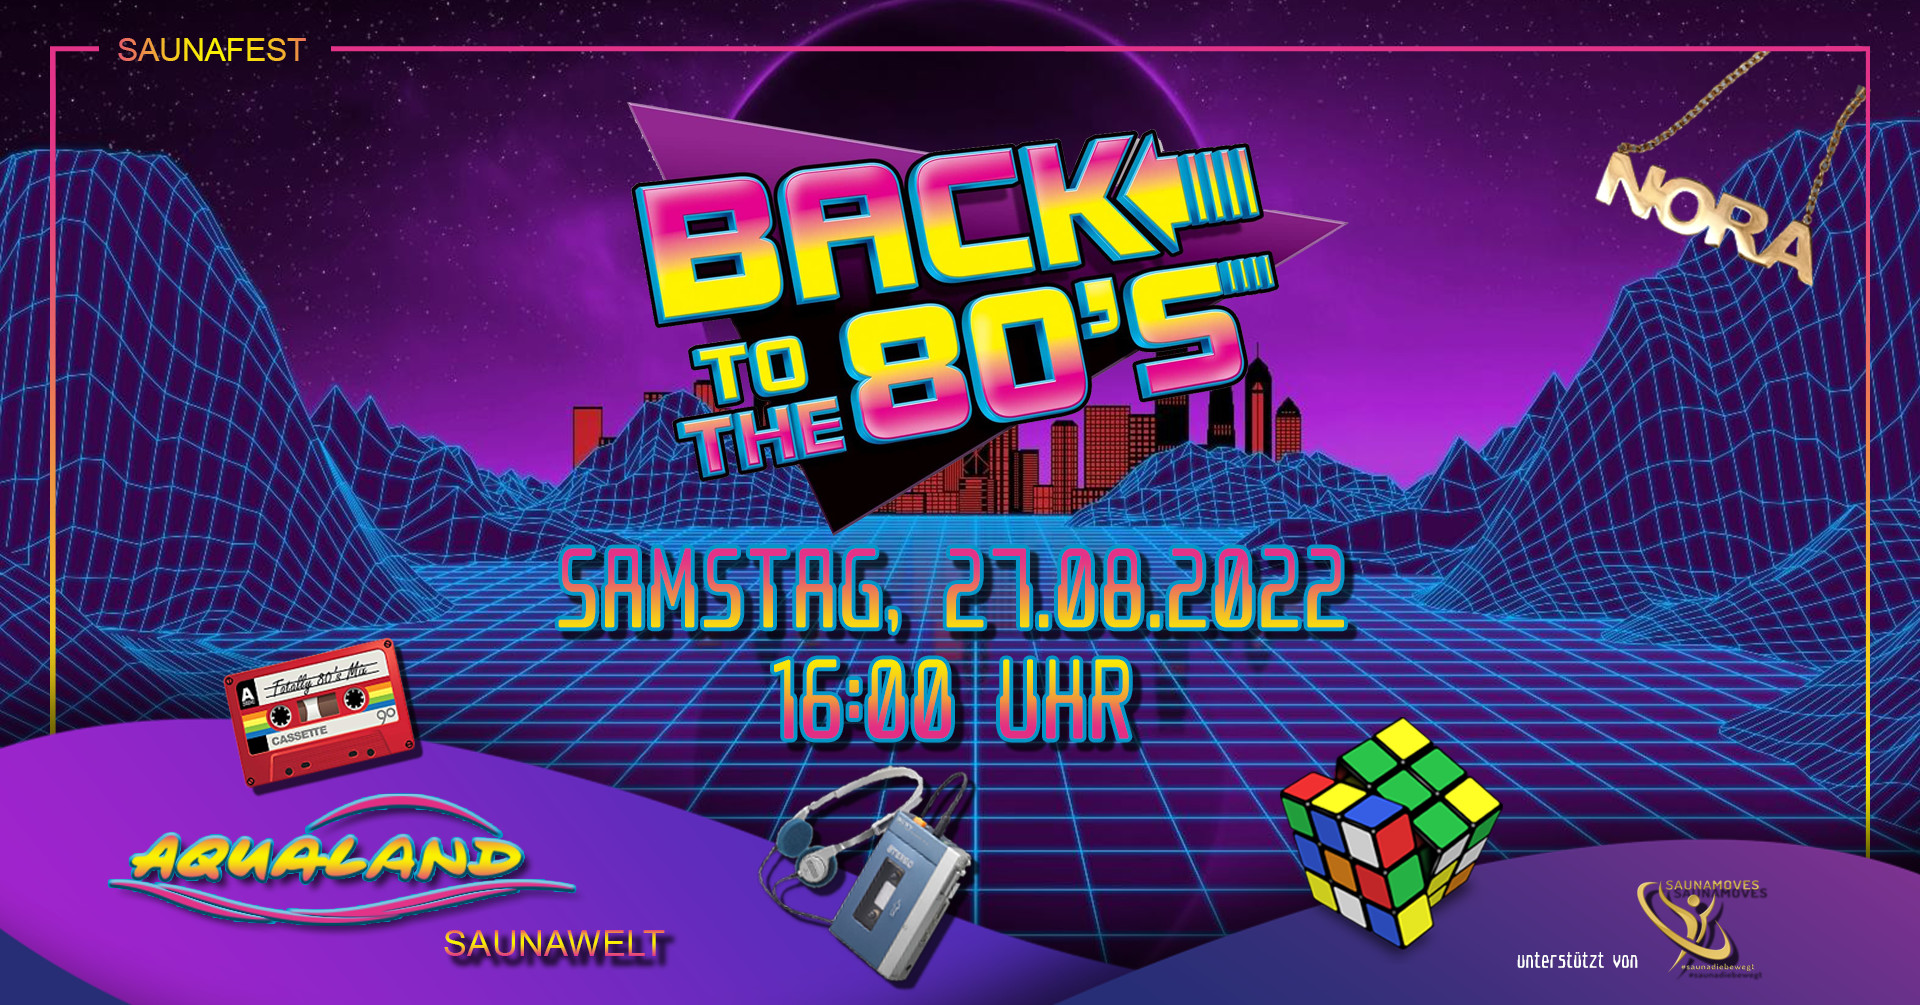 Back to the 80s